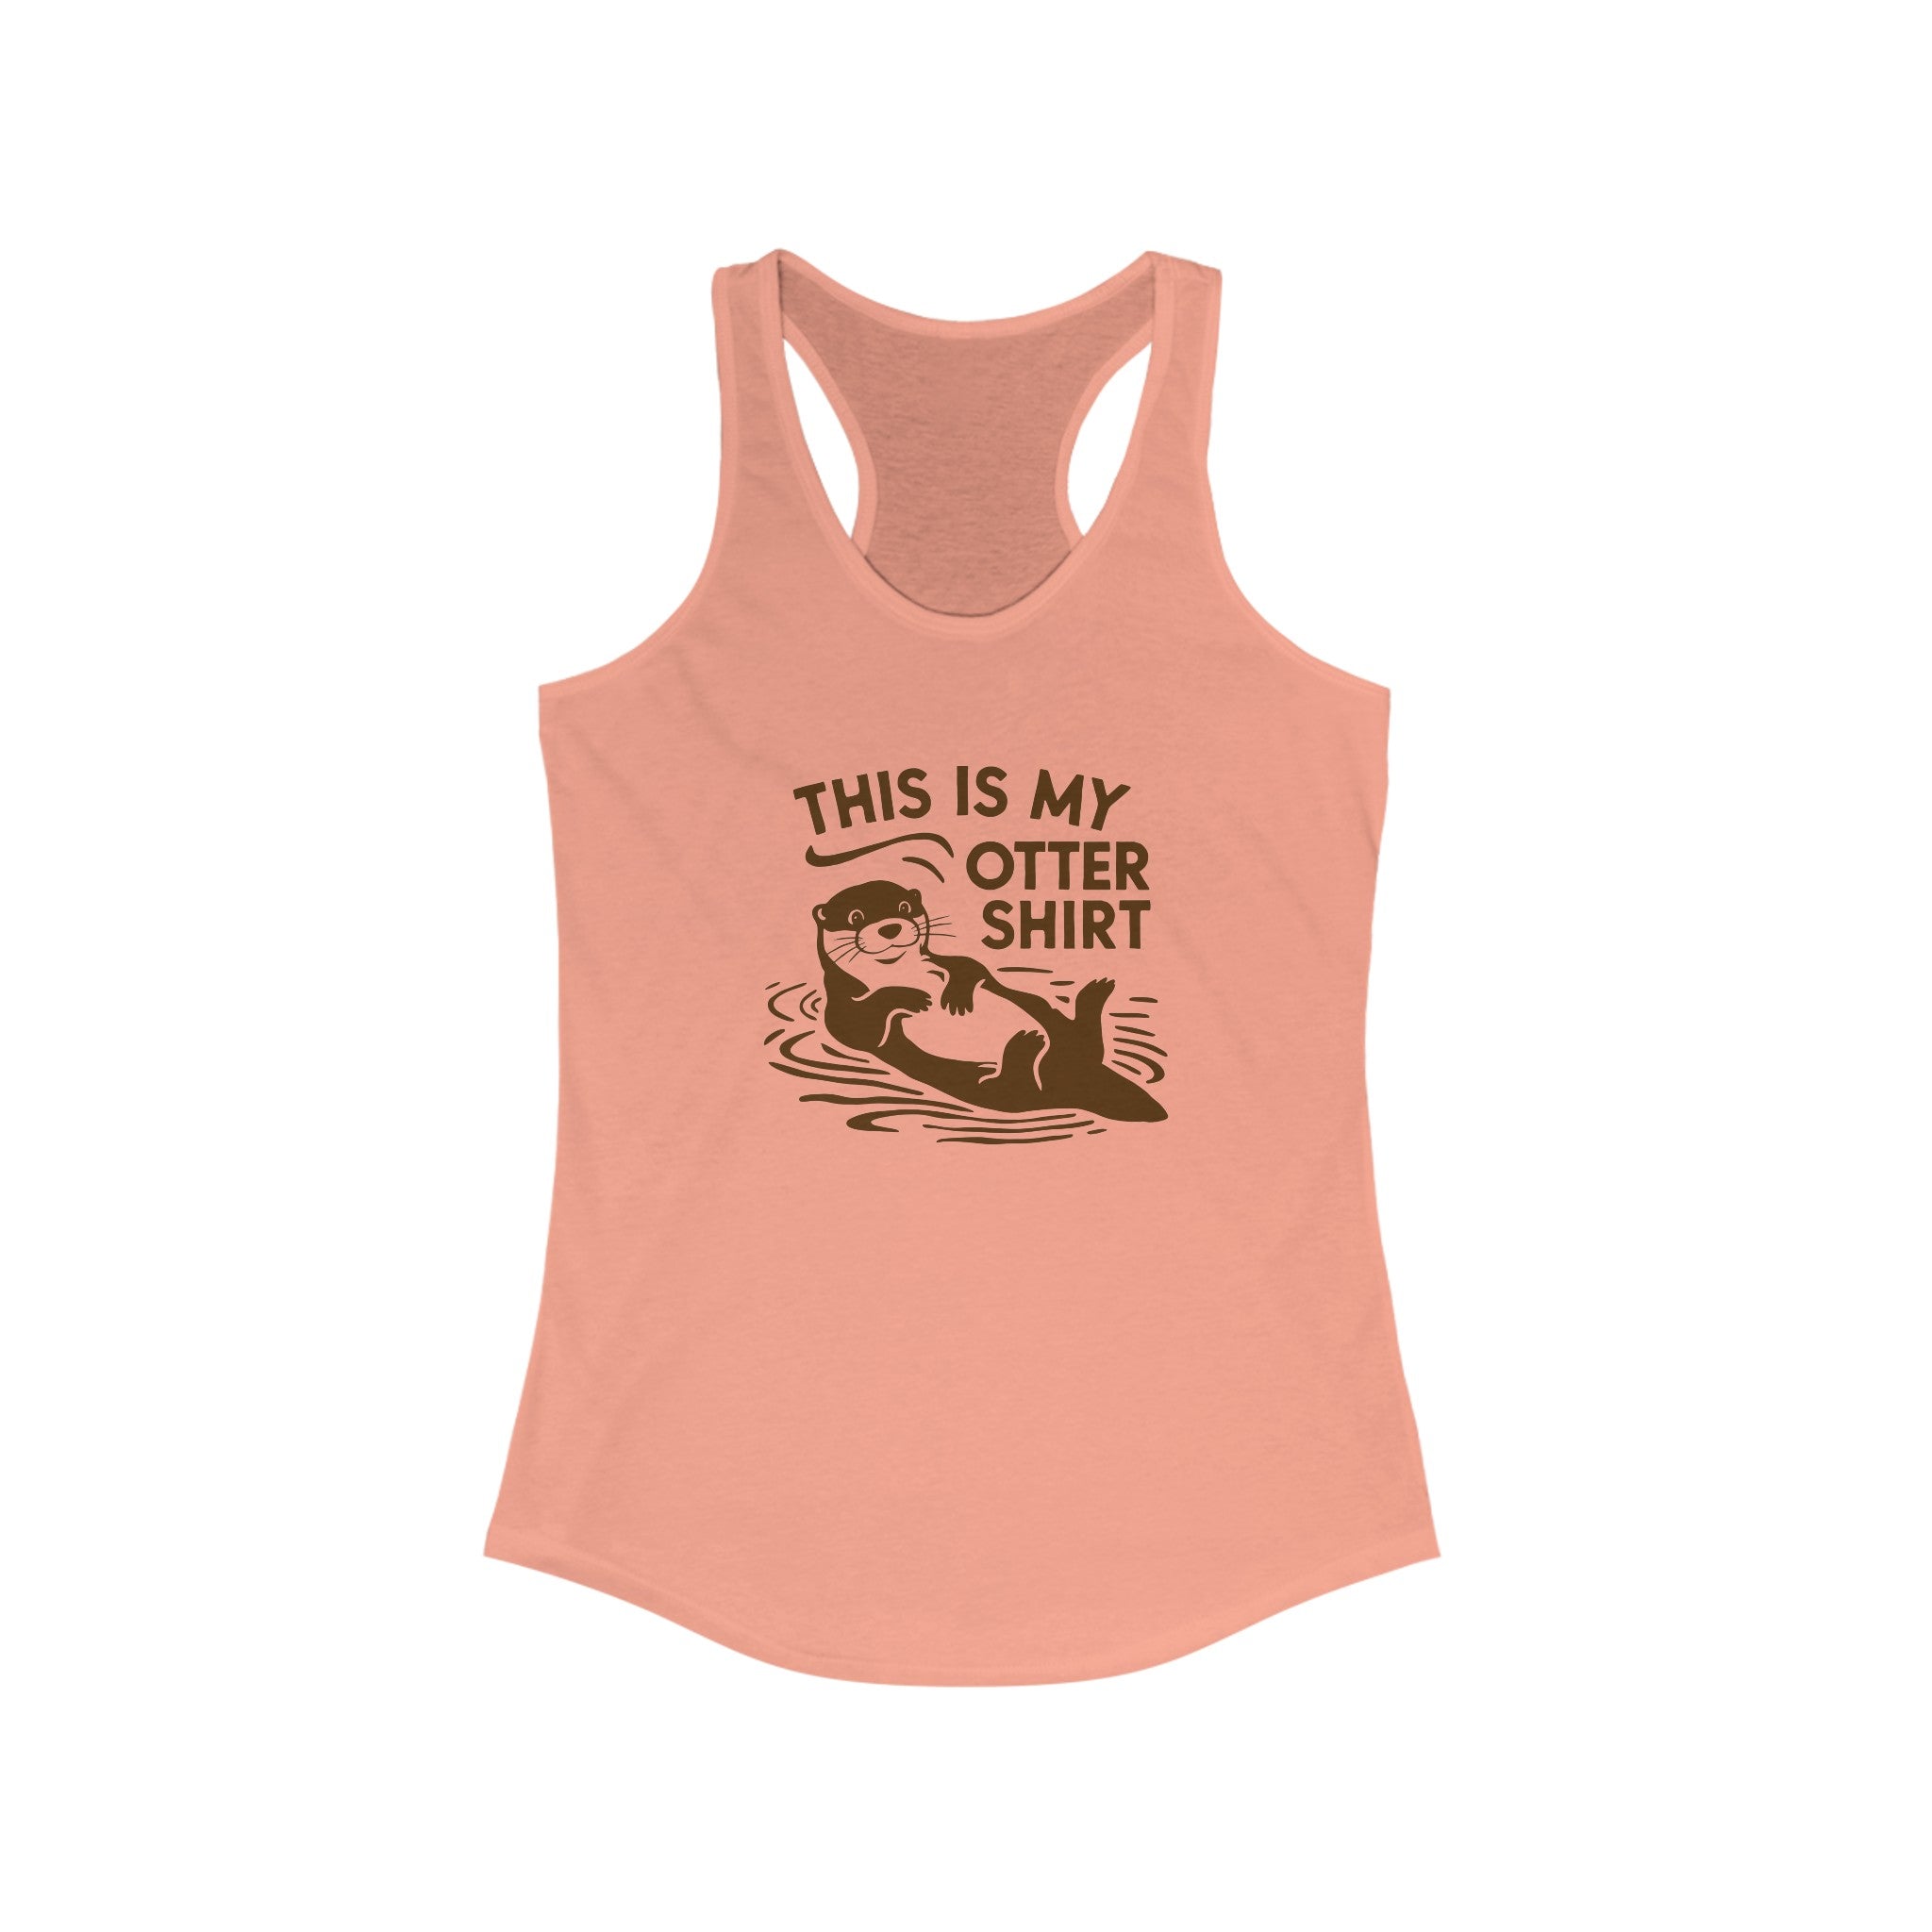 This lightweight "My Otter Shirt - Women's Racerback Tank," perfect for an active lifestyle, sports a peach color and features an illustration of an otter in water along with the playful text "THIS IS MY OTTER SHIRT.